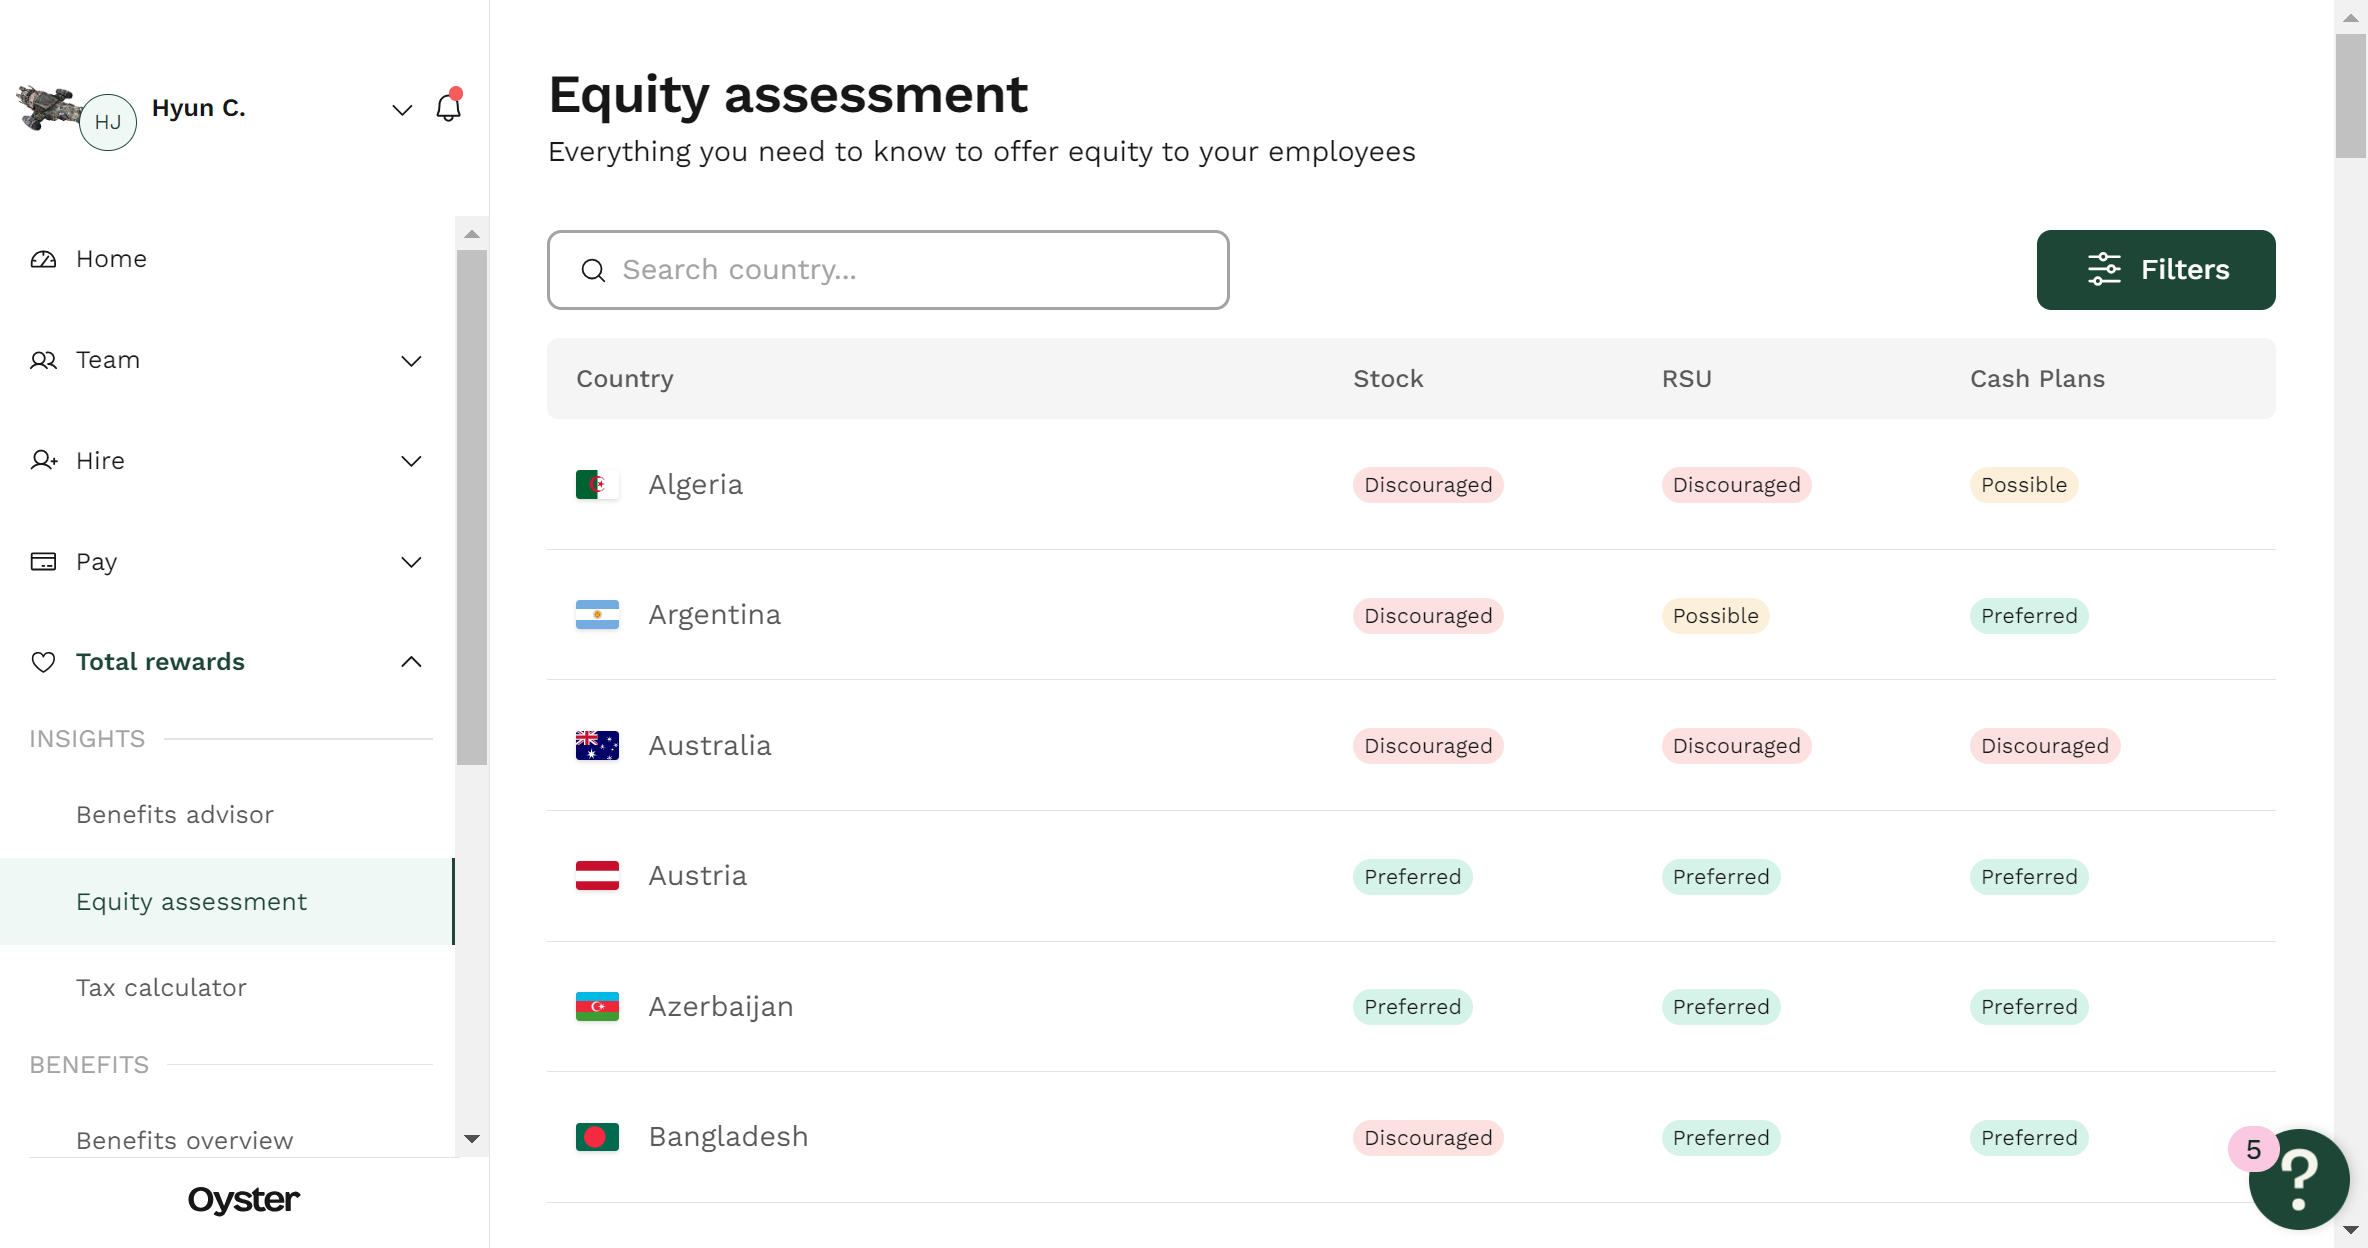 The equity assessment tool helps you identify what type of equity (Stock Options, RSU or Cash Plans) makes sense based on where the team member is located. 

Simply search for the country you're interested in.

Step 1 of 4